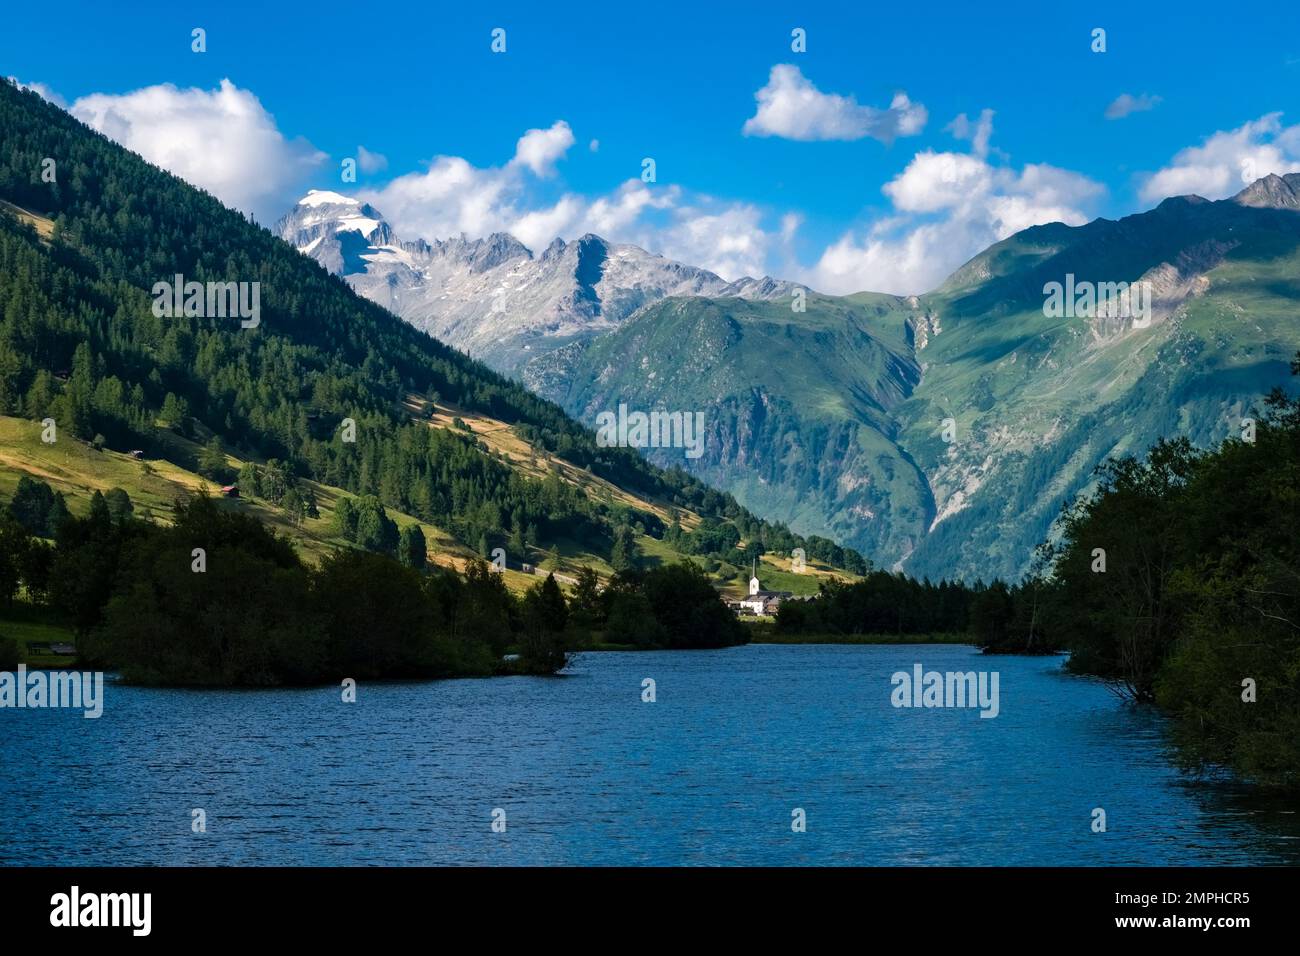 View over the lake Geschinersee to the church of Ulrichen, the snow covered summit of the mountain Galenstock in the distance. Stock Photo